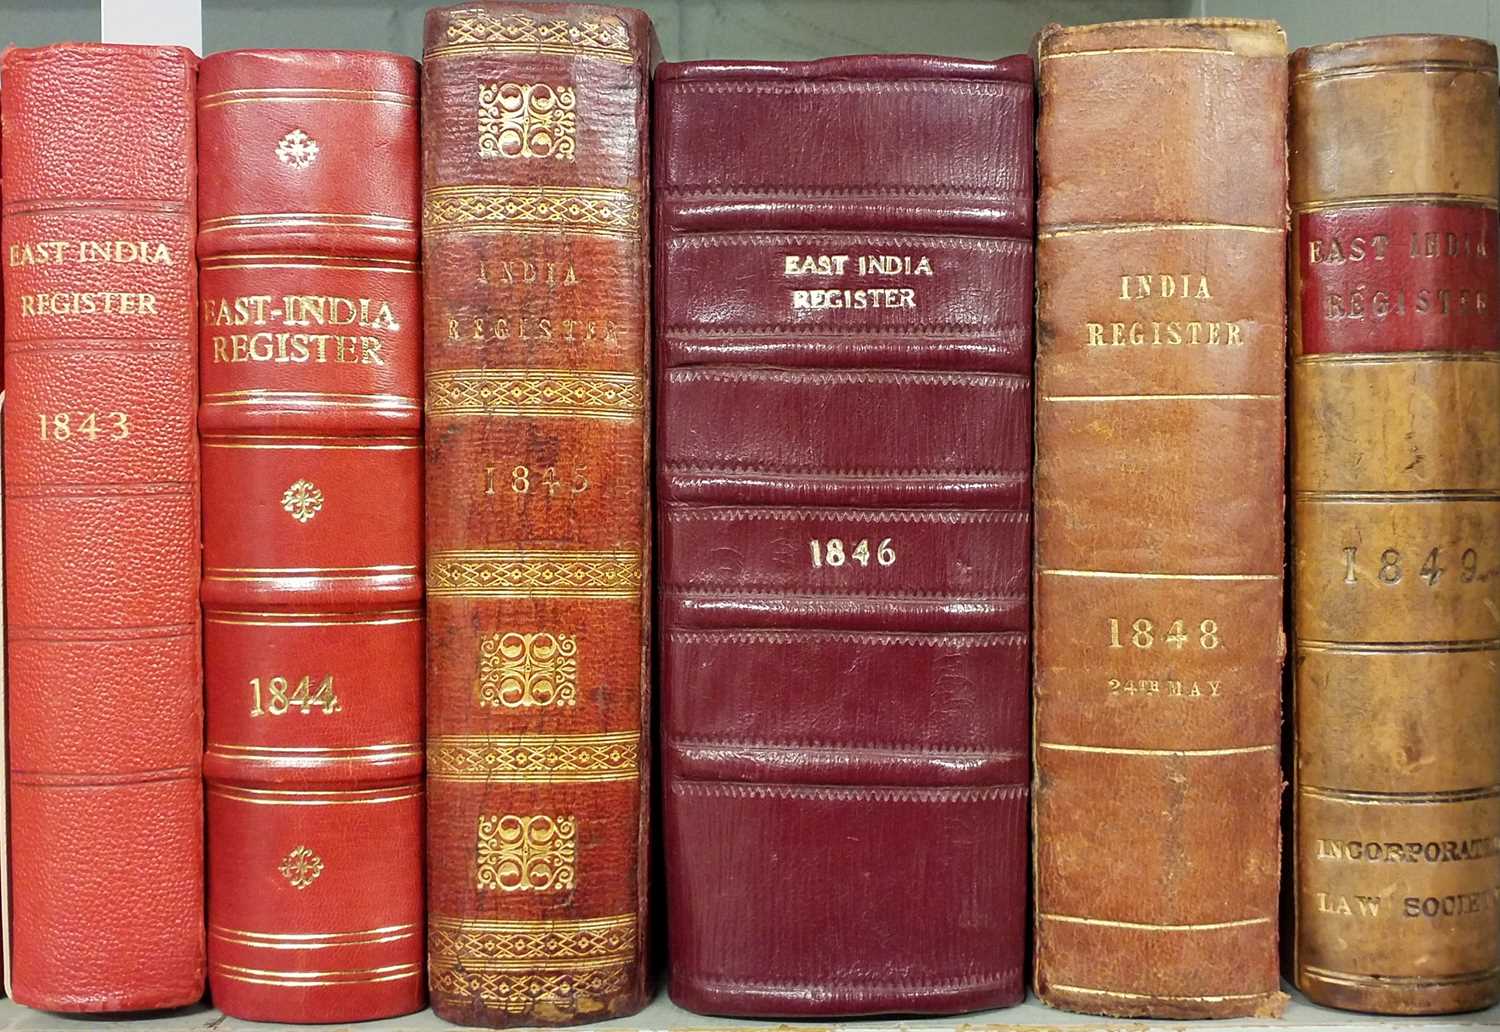 East-India Register, 1843, 1844, 1845, 1846, 1848, and 1849